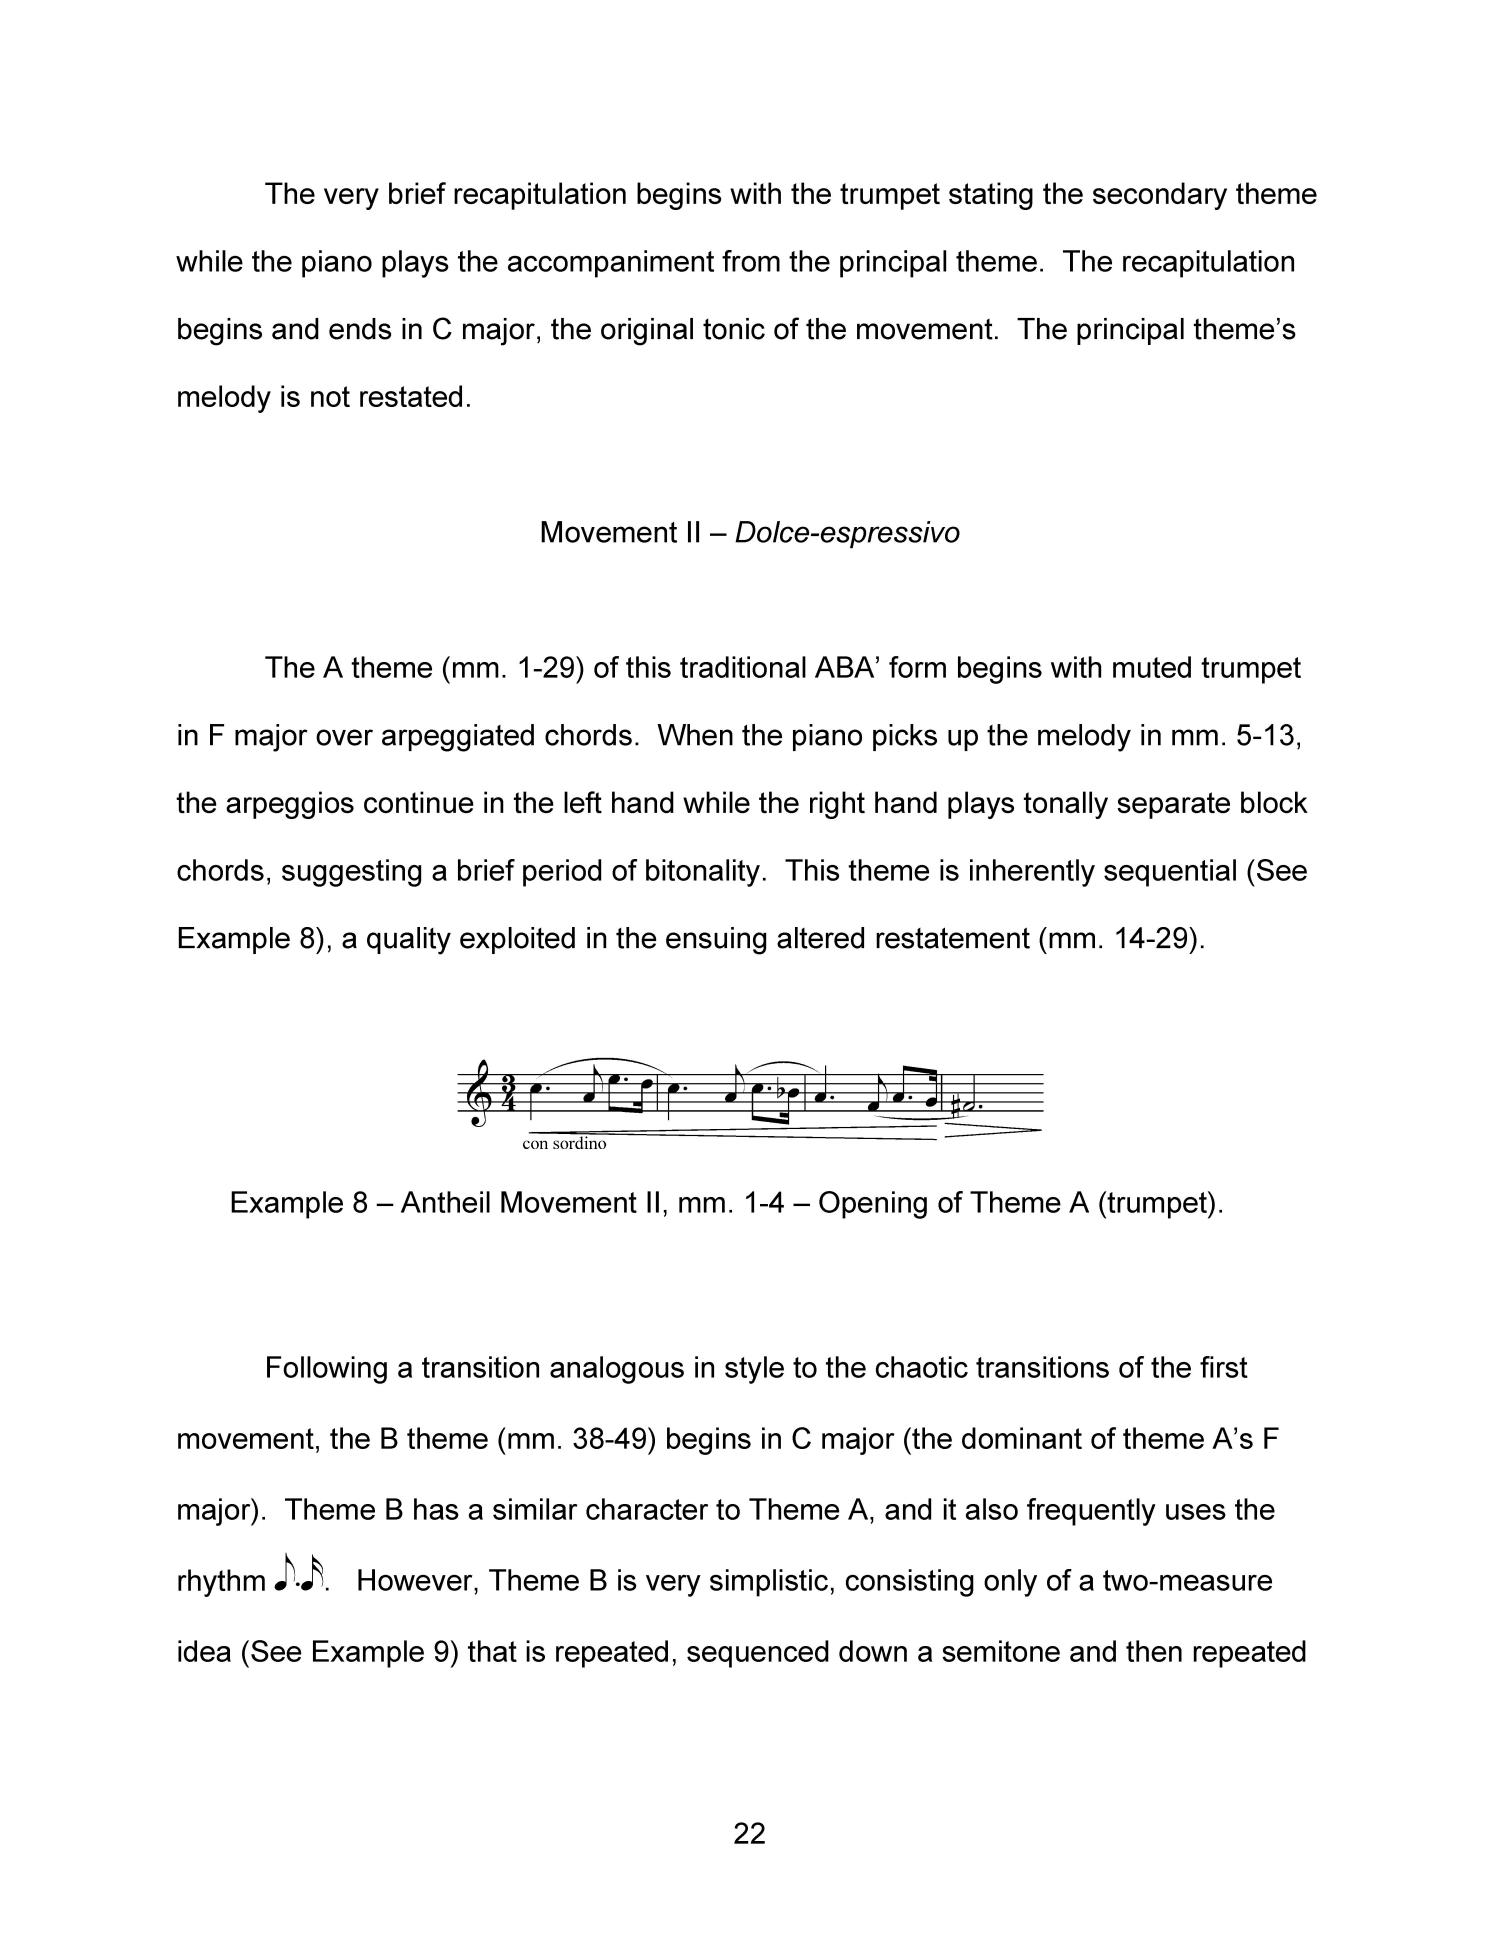 The American Trumpet Sonata in the 1950s: An Analytical and Sociohistorical Discussion of Trumpet Sonatas by George Antheil, Kent Kennan, Halsey Stevens, and Burnet Tuthill.
                                                
                                                    22
                                                